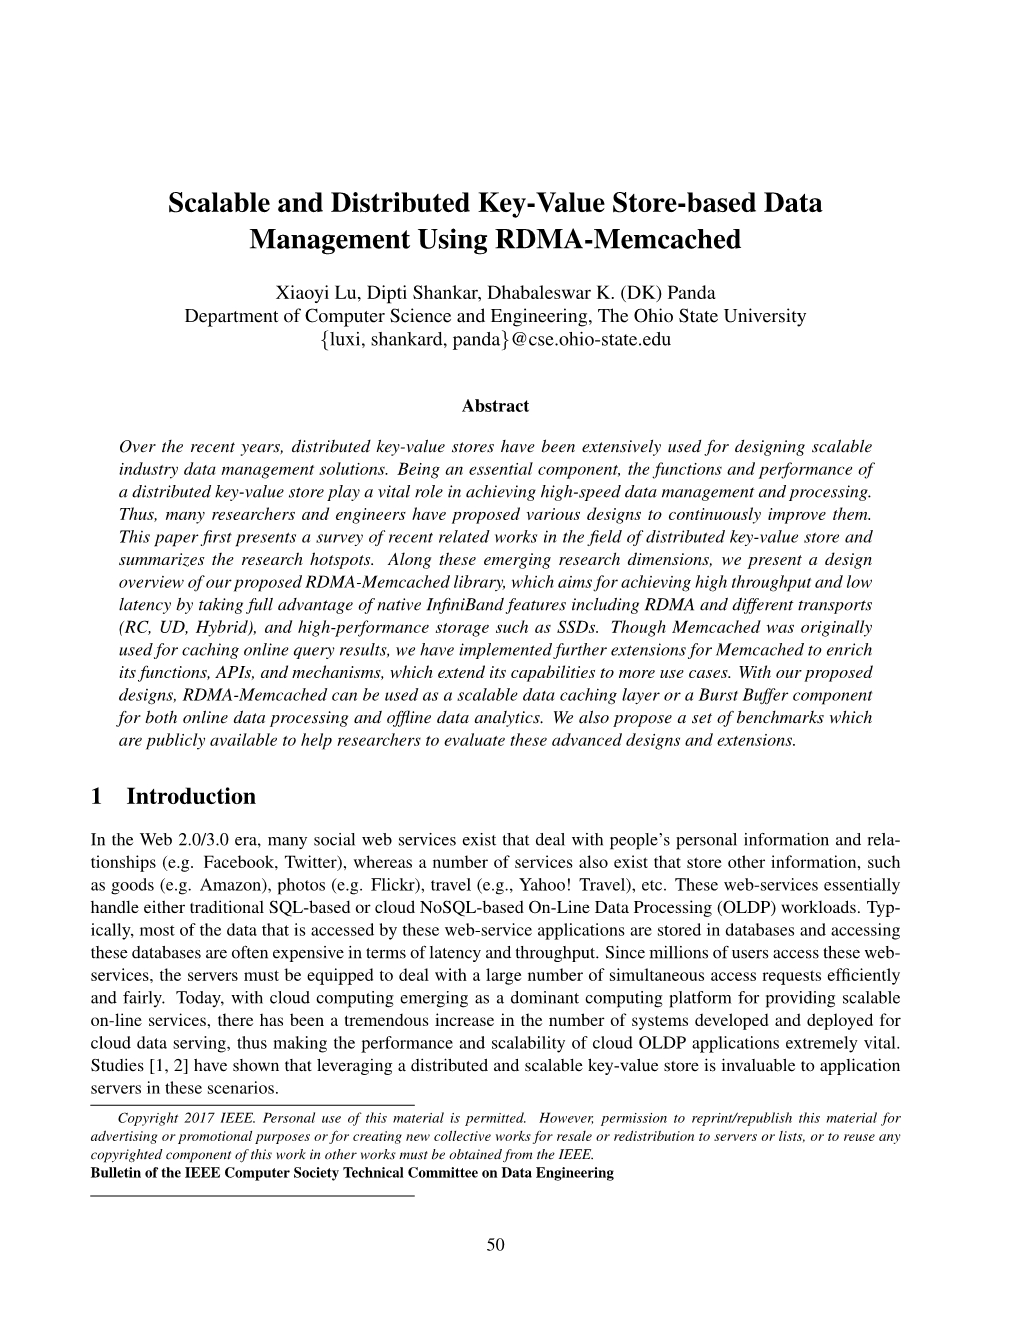 Scalable and Distributed Key-Value Store-Based Data Management Using RDMA-Memcached